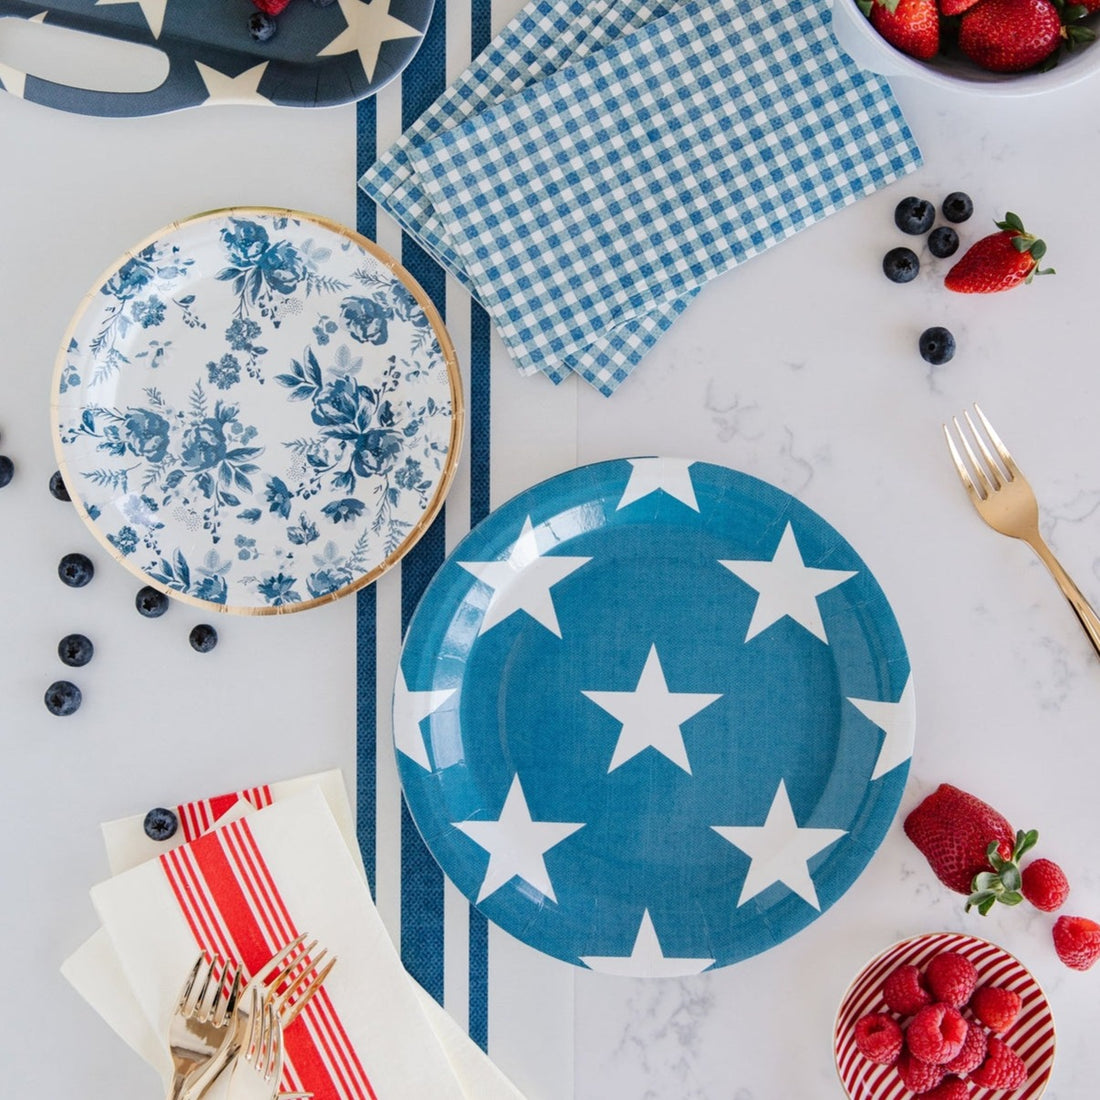 Table setting with paper plates, napkins and forks in a Patriotic theme.